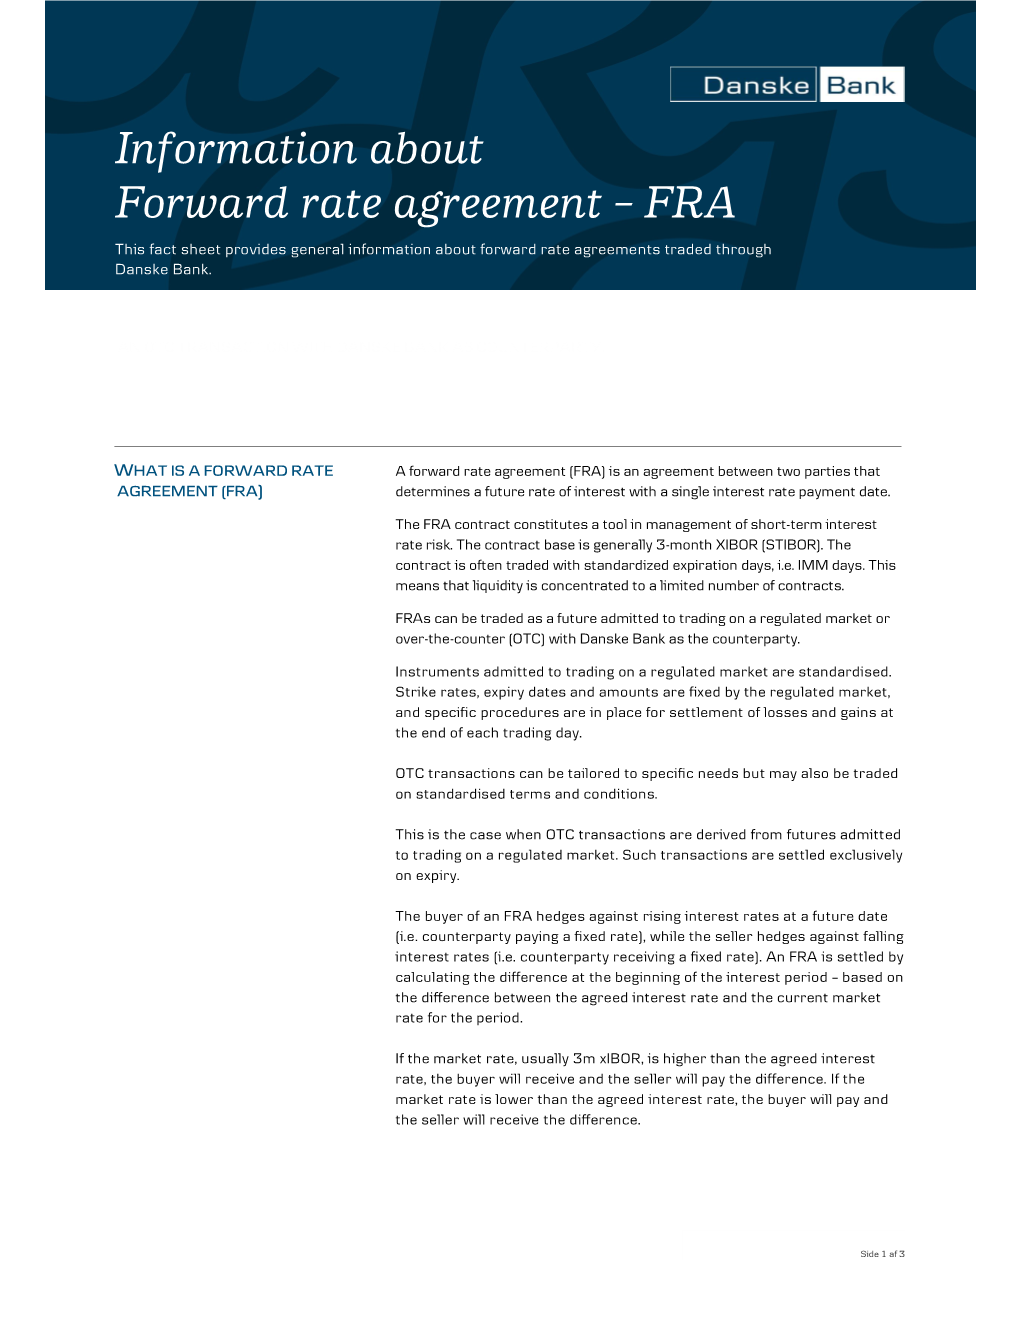 Information About Forward Rate Agreement –